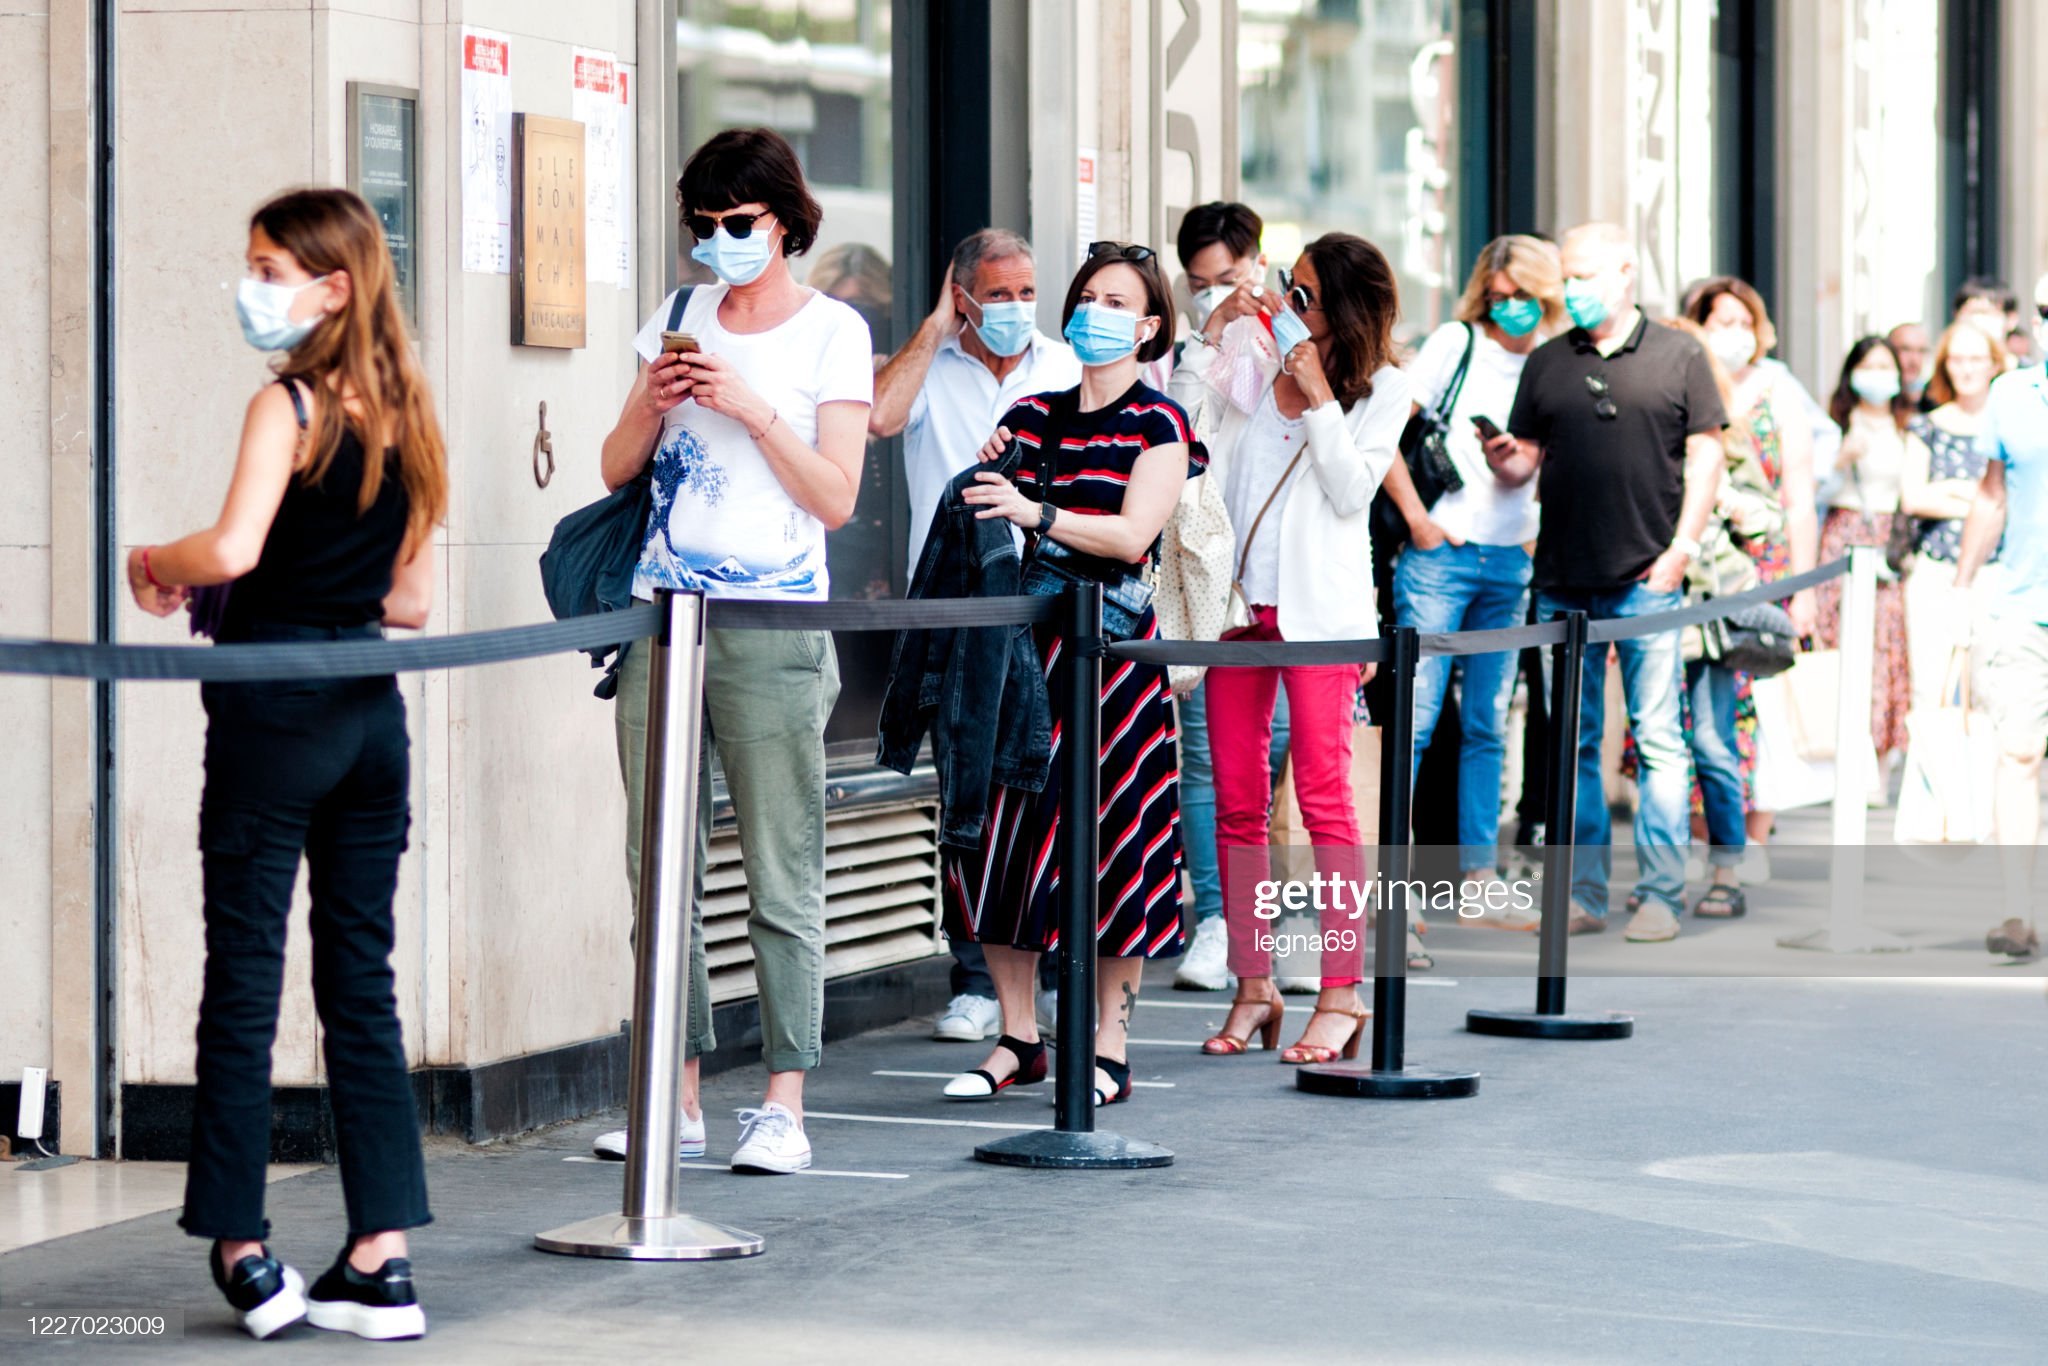 queue-in-front-of-a-shop-during-pandemic-covid19-in-europe-people-a-picture-id1227023009